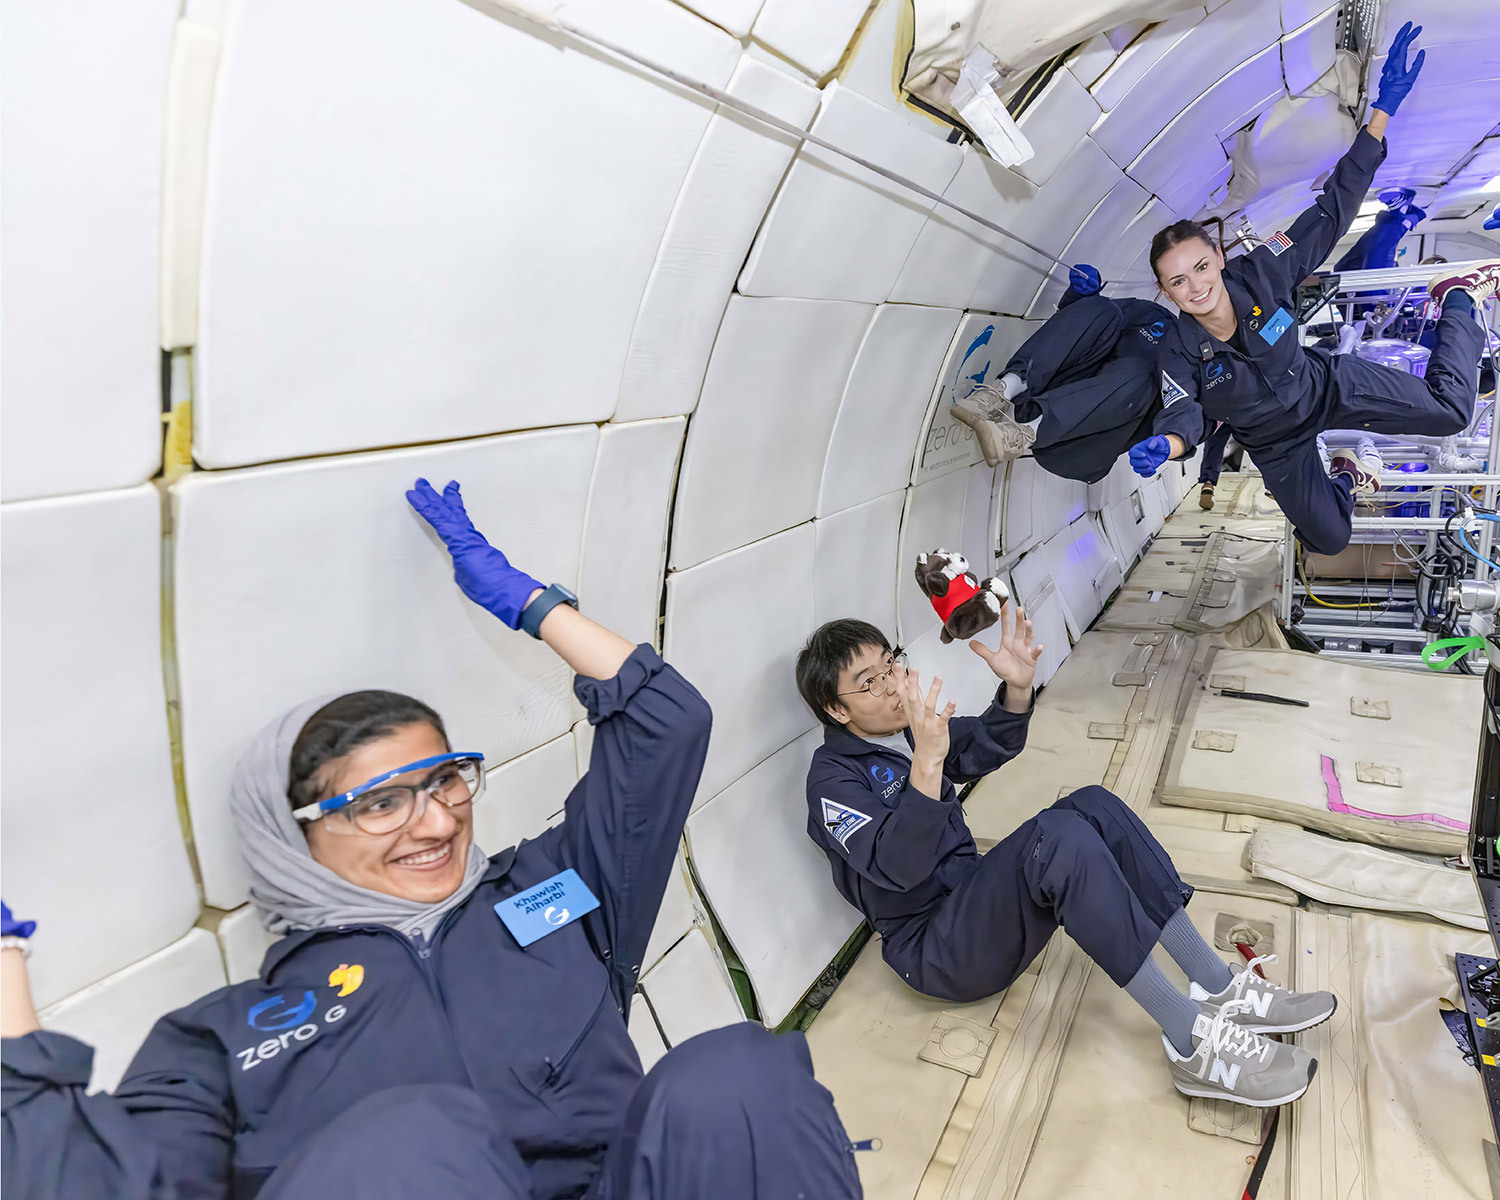 UW-Madison Ph.D. students Khawlah Ahmad Alharbi (left), Xuepeng Jiang (center) and Rayne Wolf (right) experience weightlessness on G-Force One prior to testing their 3D printer in zero-gravity.